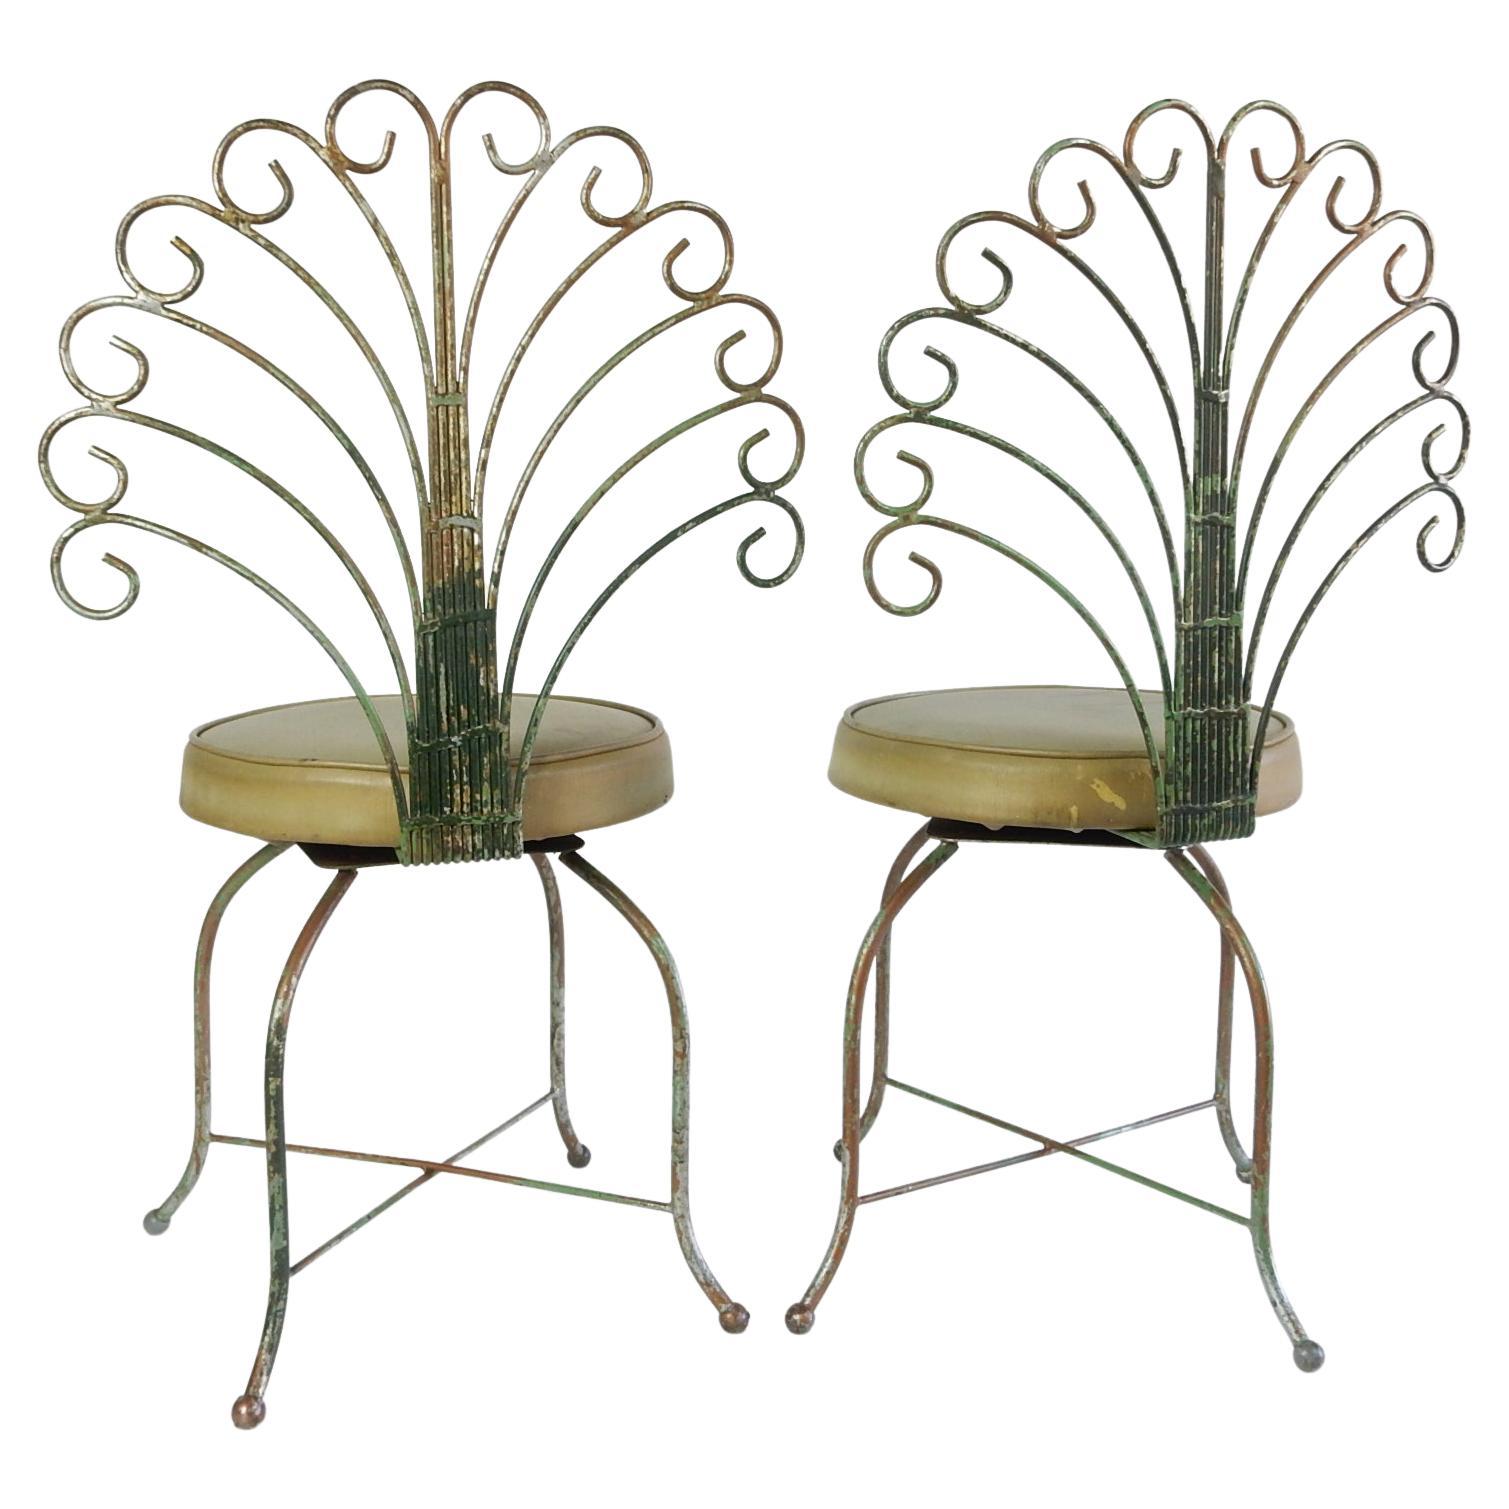 Fun pair of bent rod swivel vanity or garden chairs with 